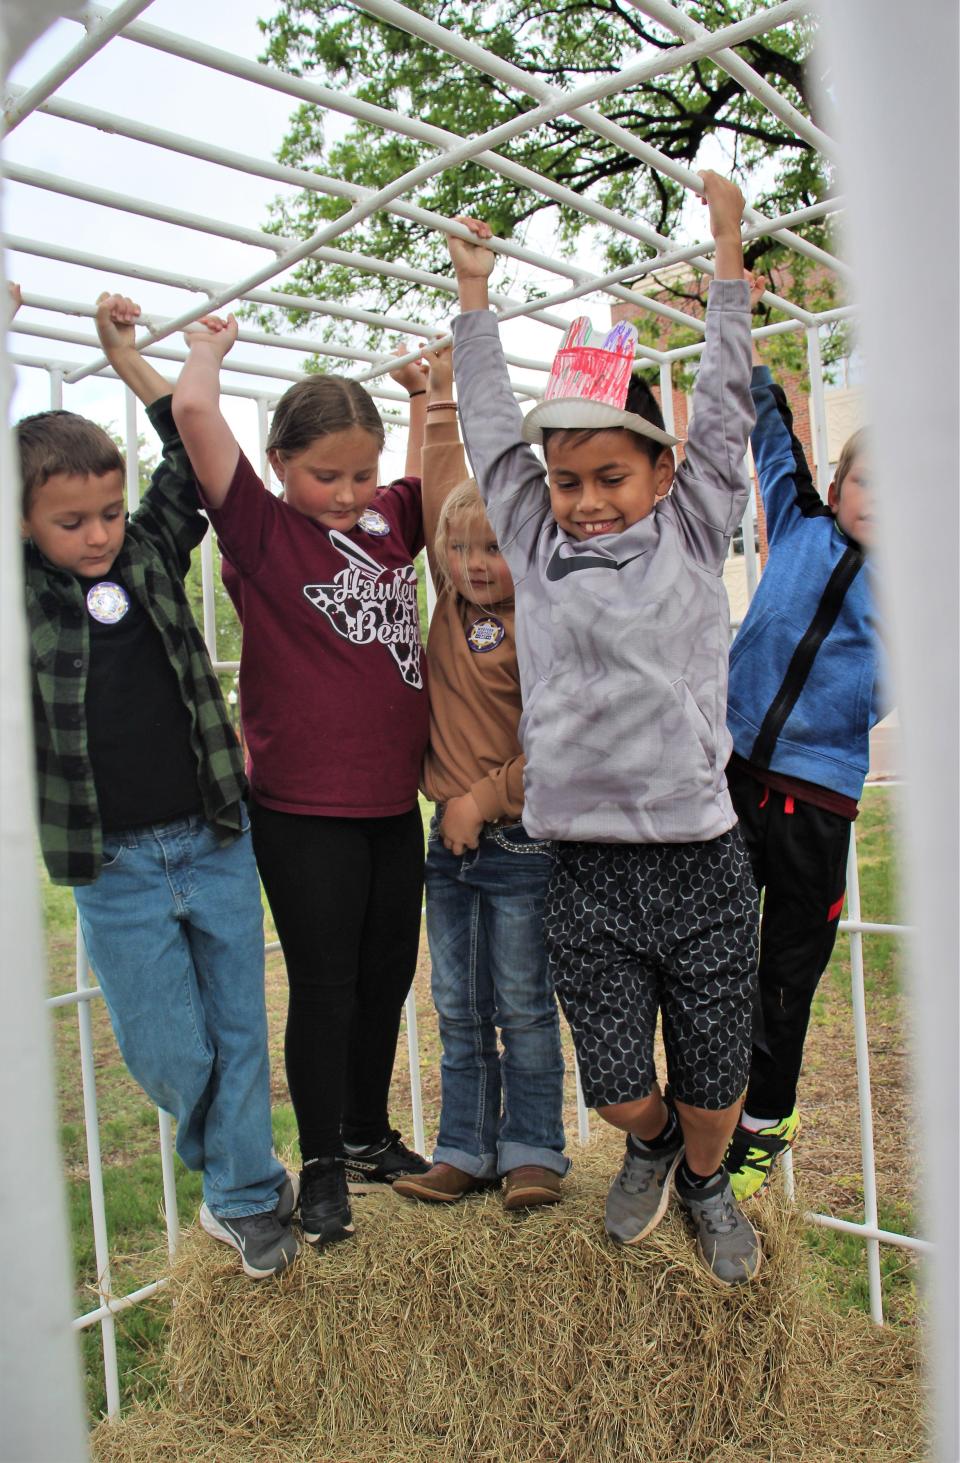 Hawley first-graders got to hang out a few minutes at the jail at HSU's Western Heritage Day Thursday. To get out, they had to promise the jailer "I will never come back again!"